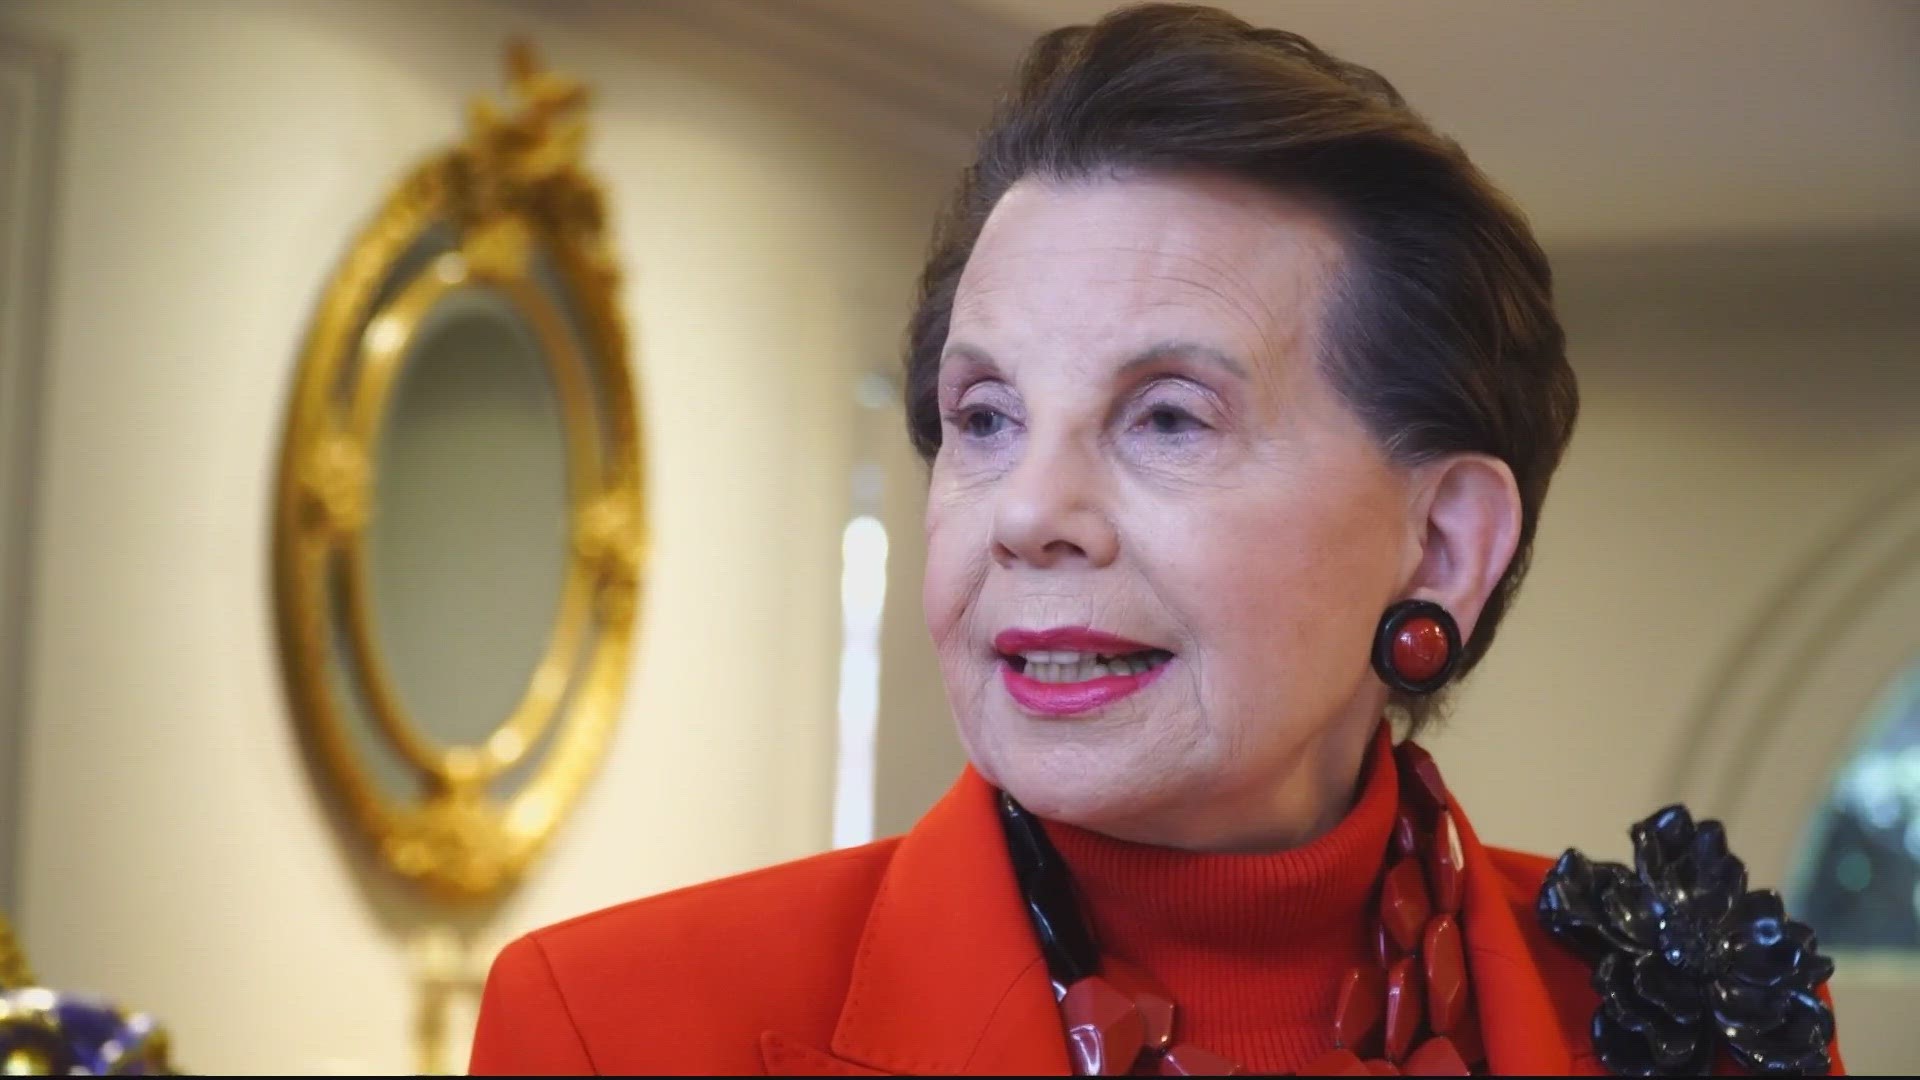 Adrienne Arsht has spent decades working to build a more resilient society -- one donation at a time. And at 81, Adrienne is not slowing down.